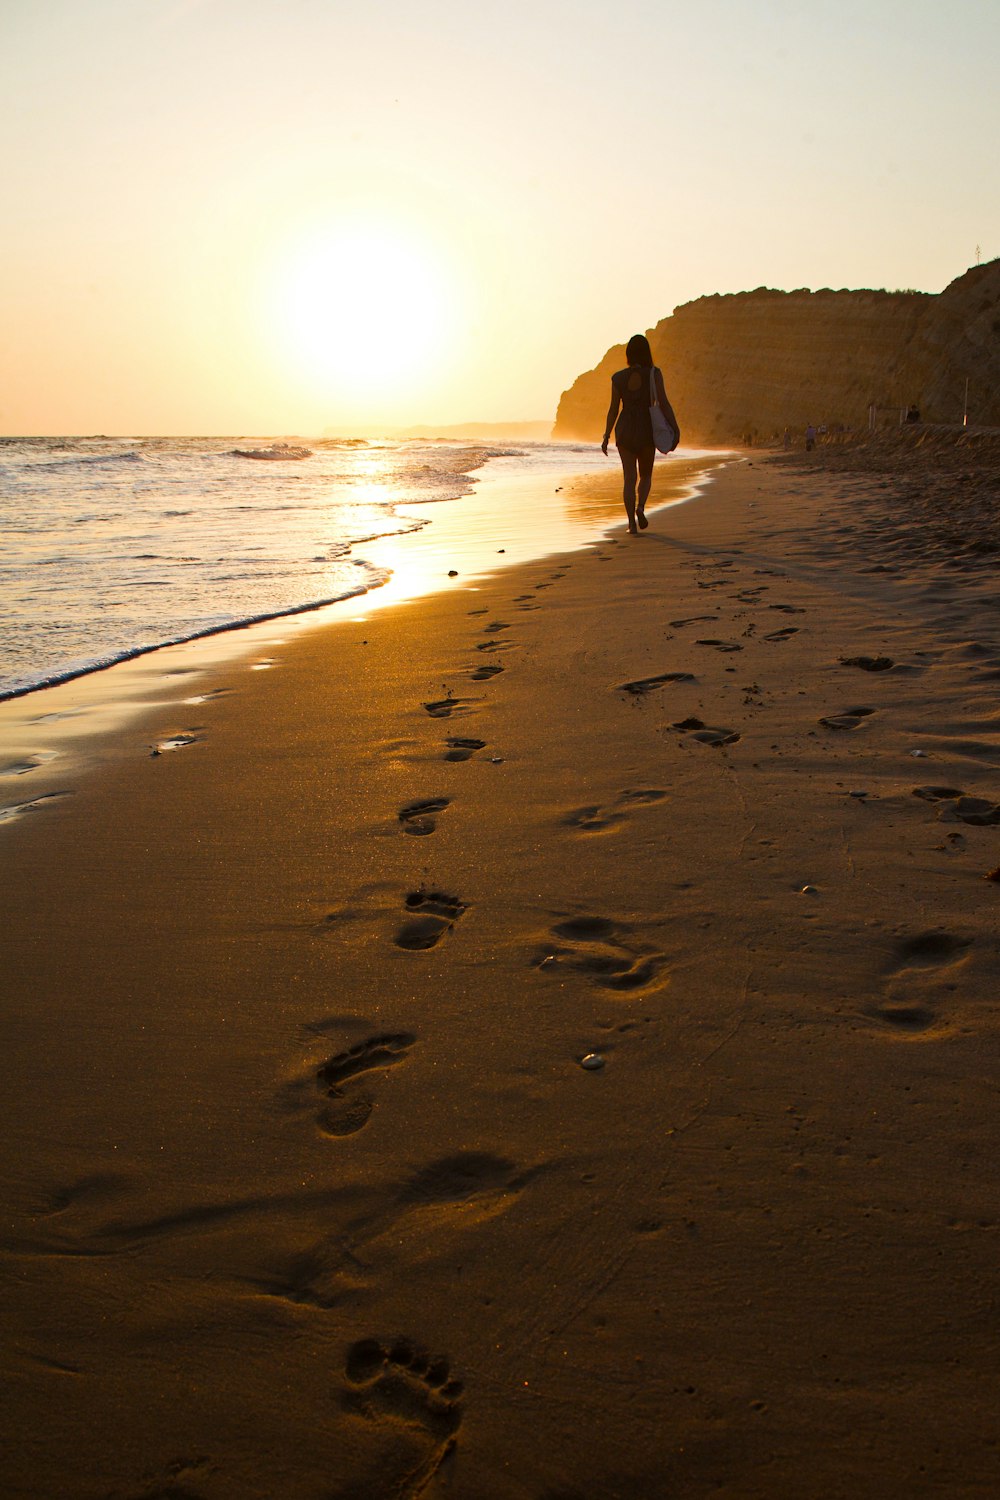 a person walking along a beach with footprints in the sand